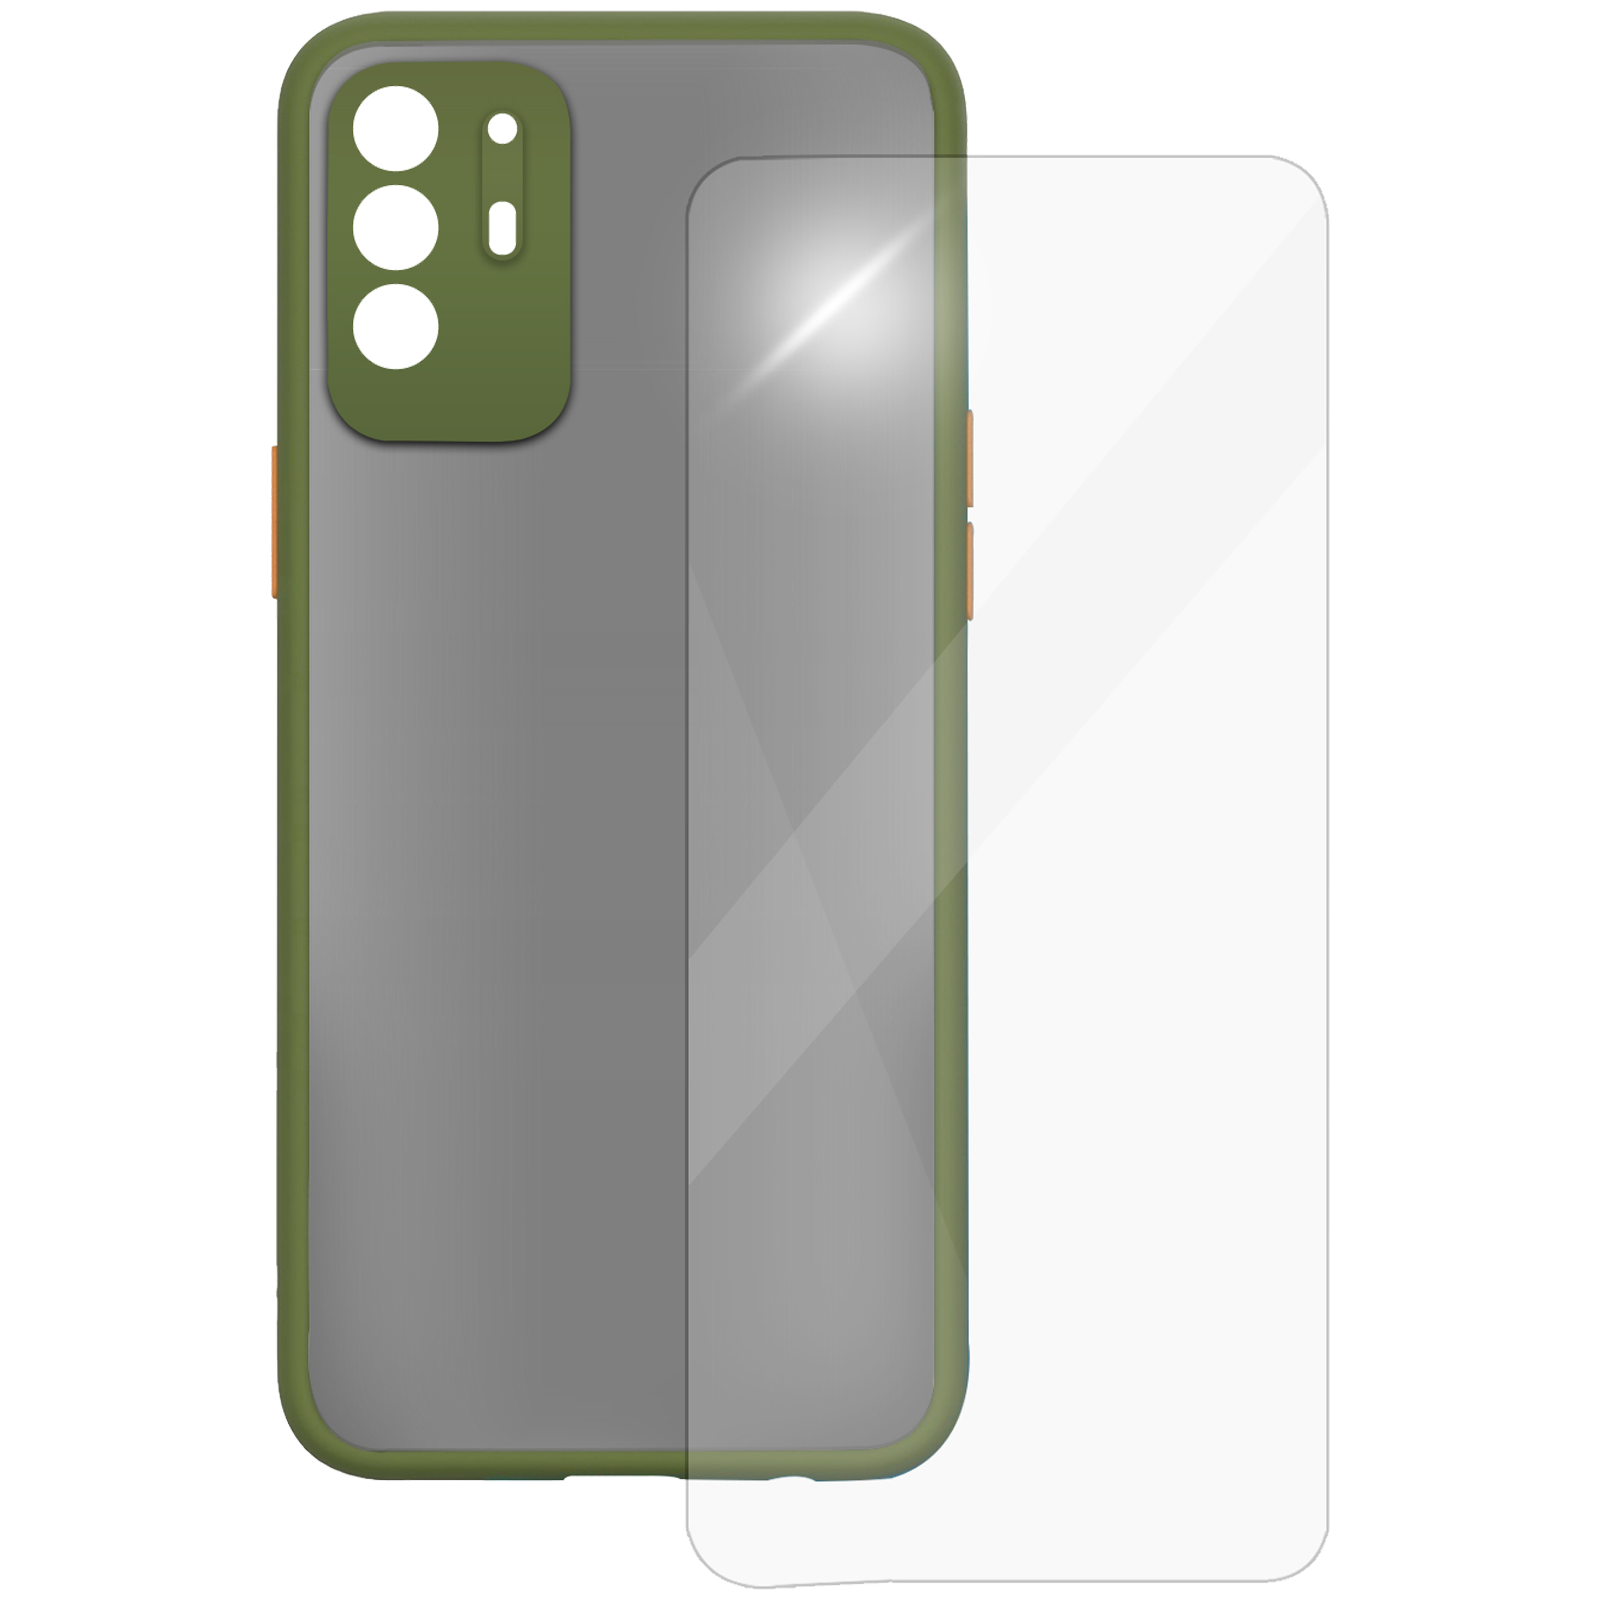 arrow - Arrow Camera Duplex Back Case and Screen Protector Bundle For Oppo India F19 Pro+ (Scratch Protection, AR-992, Light Green)